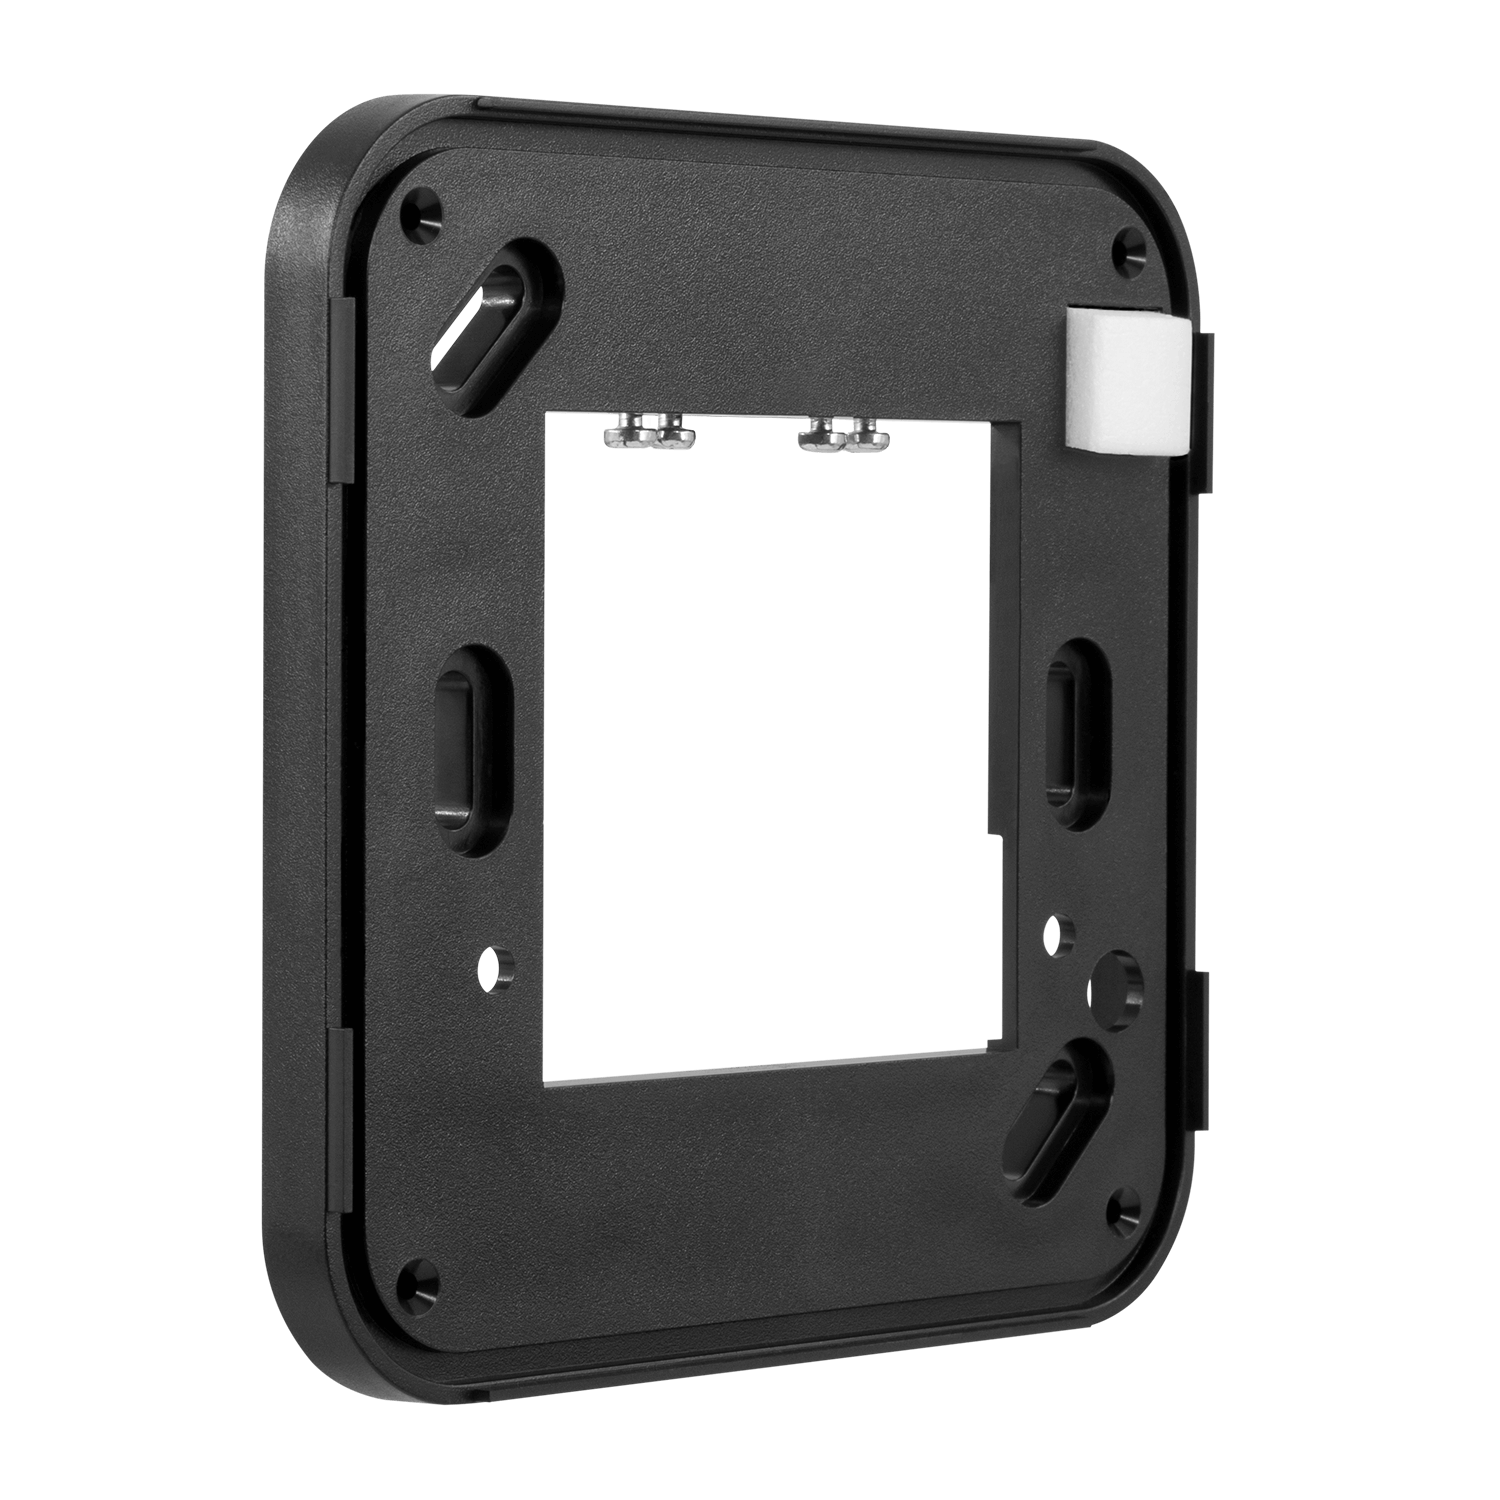 ATS 6 - 6 spacer for access control reader, black, left view